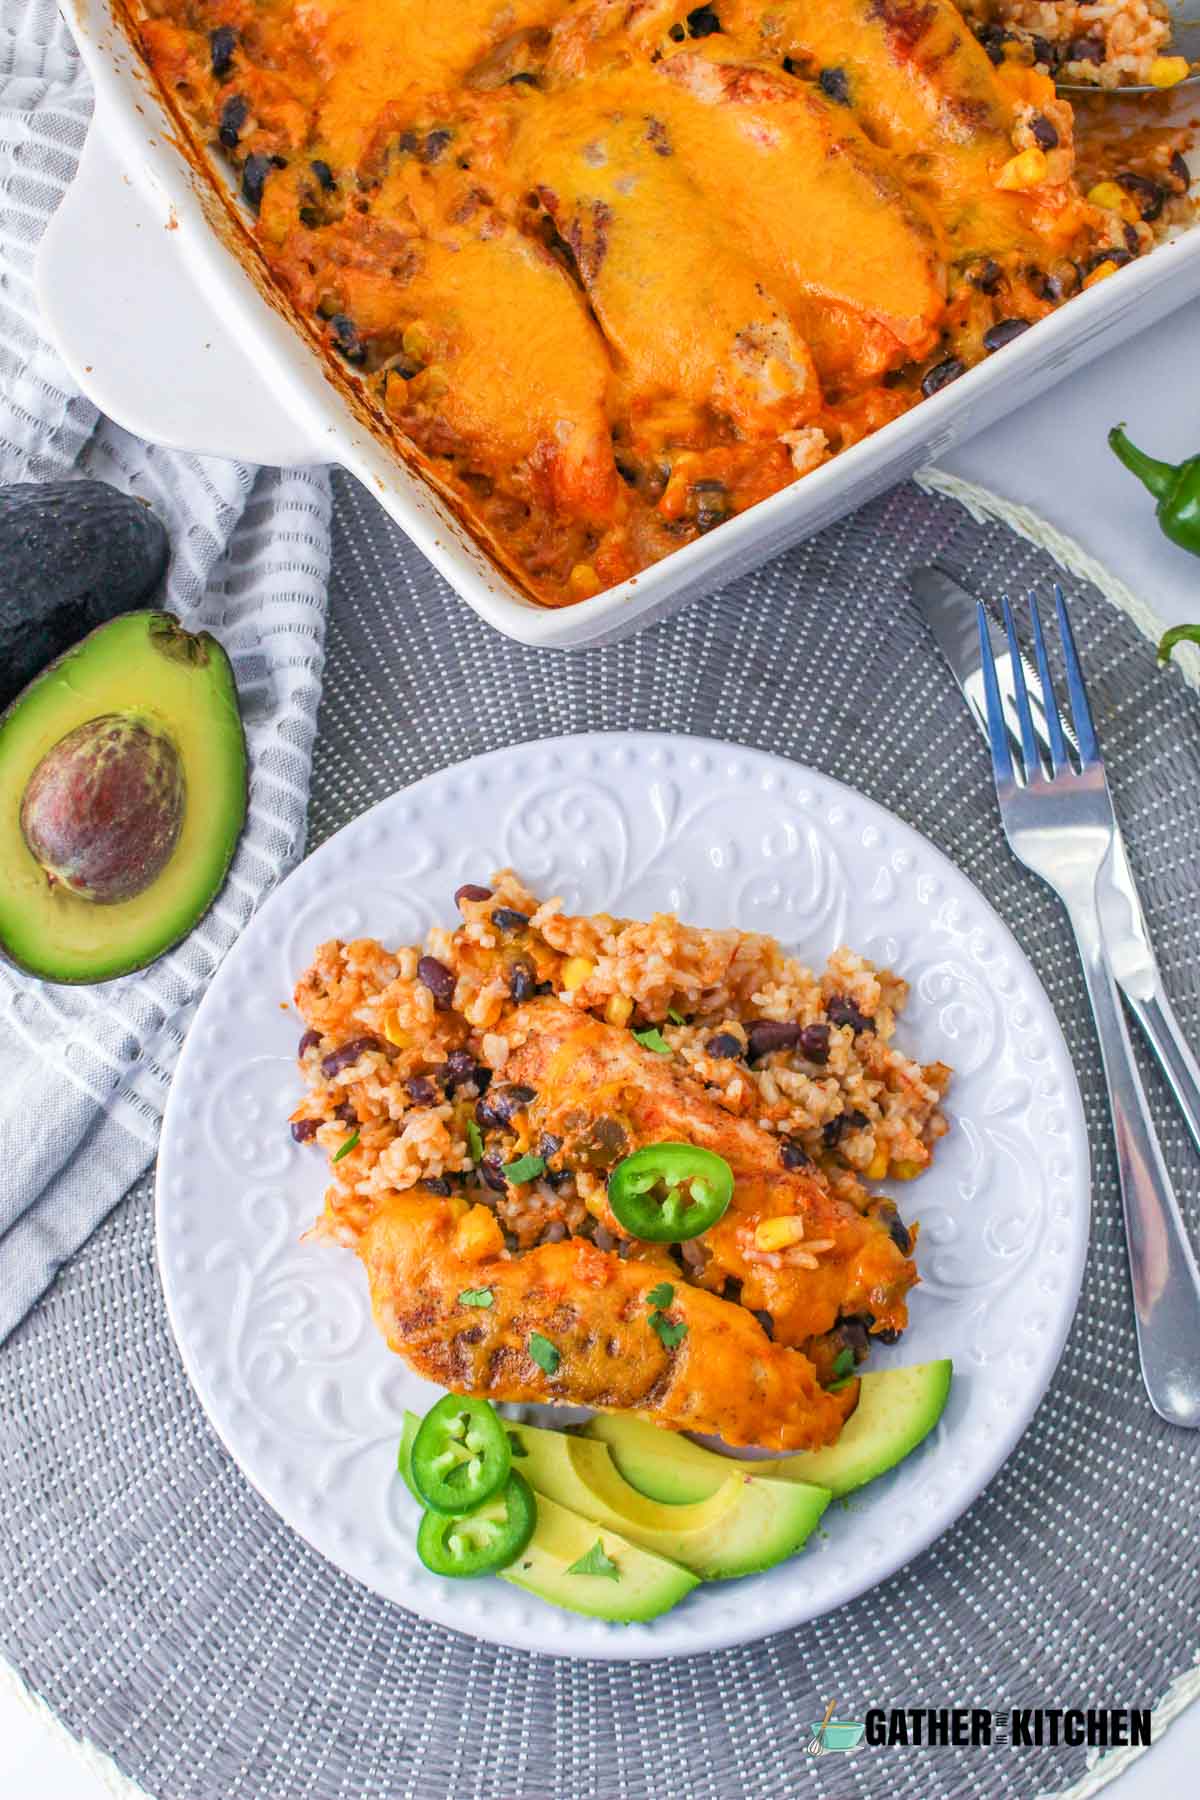 A serving of fiesta chicken & rice casserole on a plate with a fork and knife on the side